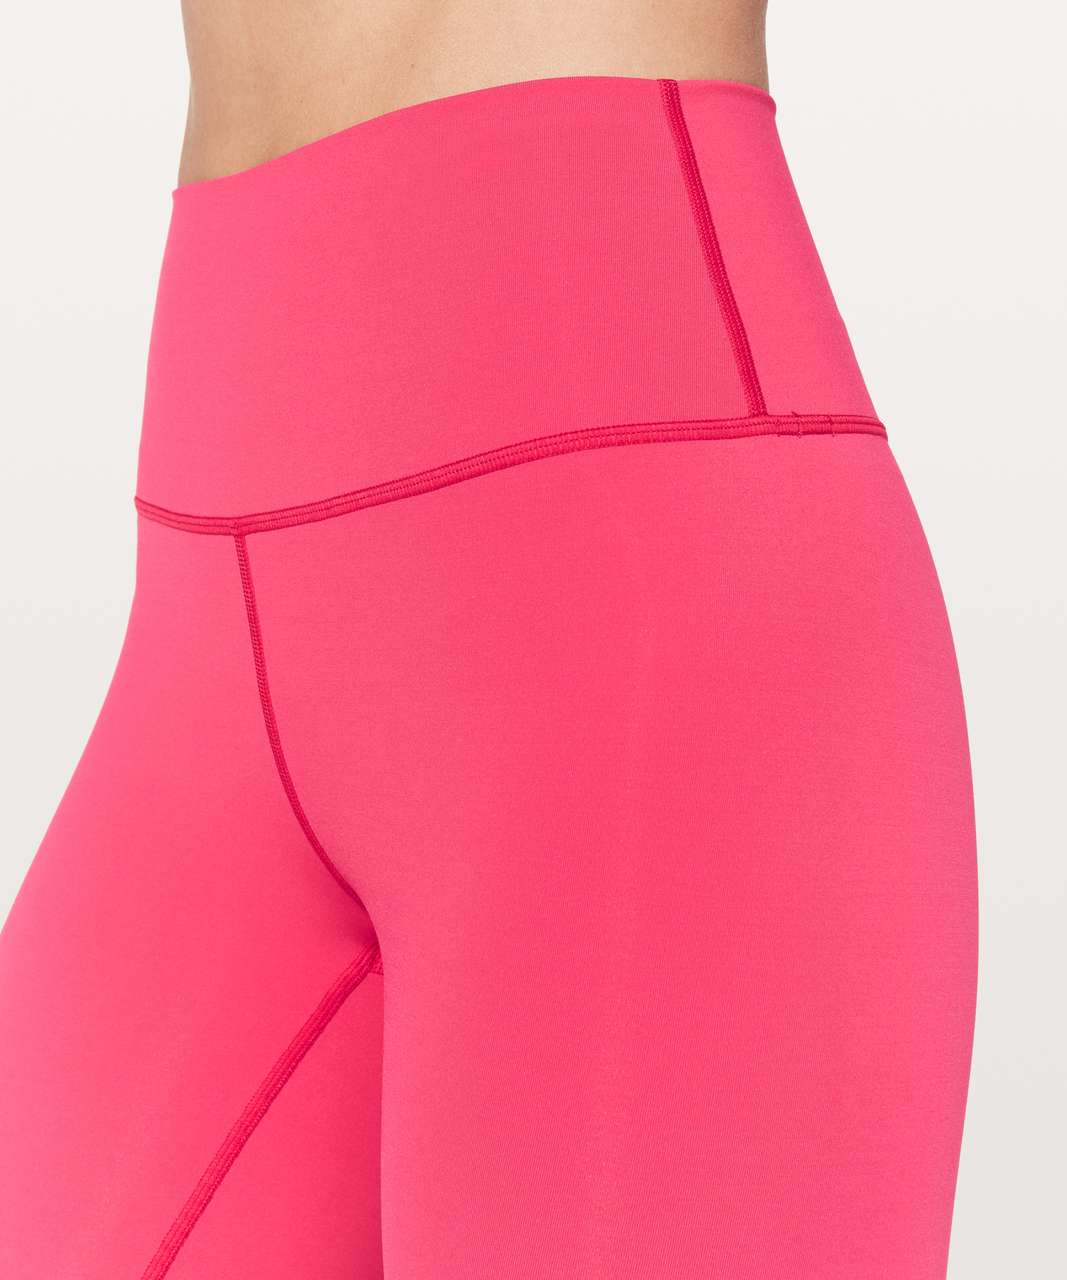 Lululemon Wunder Under Hi-Rise Tight (Ombre) *28" - Ombre Fuchsia Pink